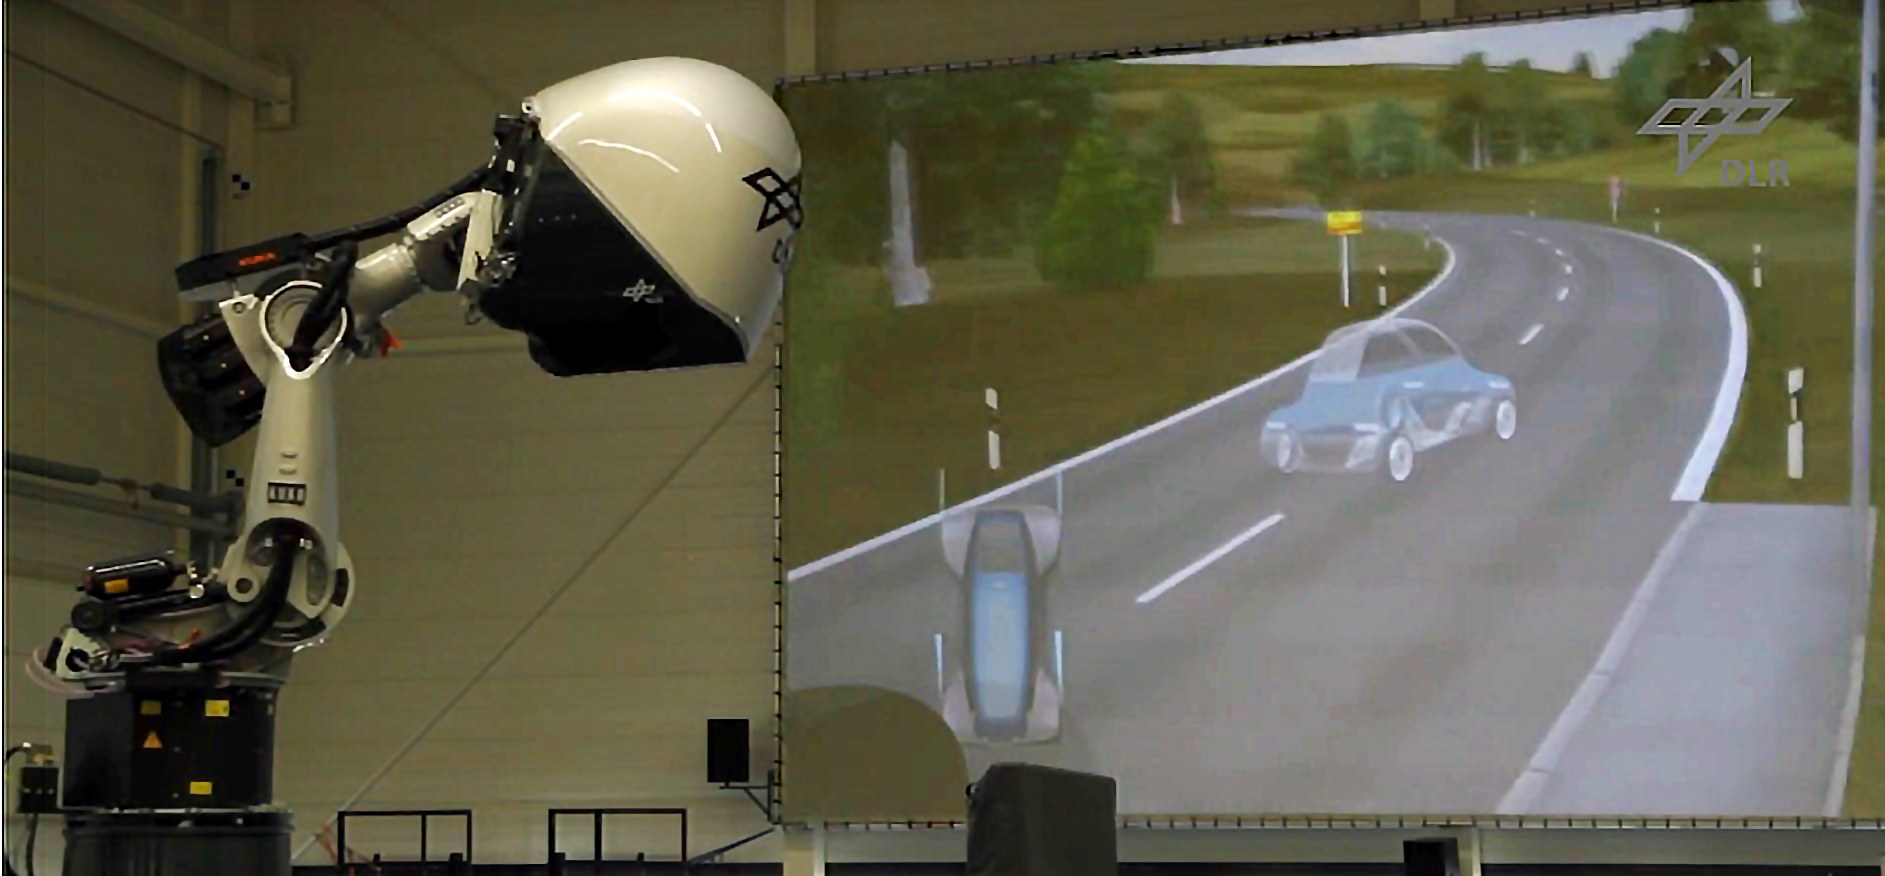 Driving simulation with the DLR Robotic Motion Simulator